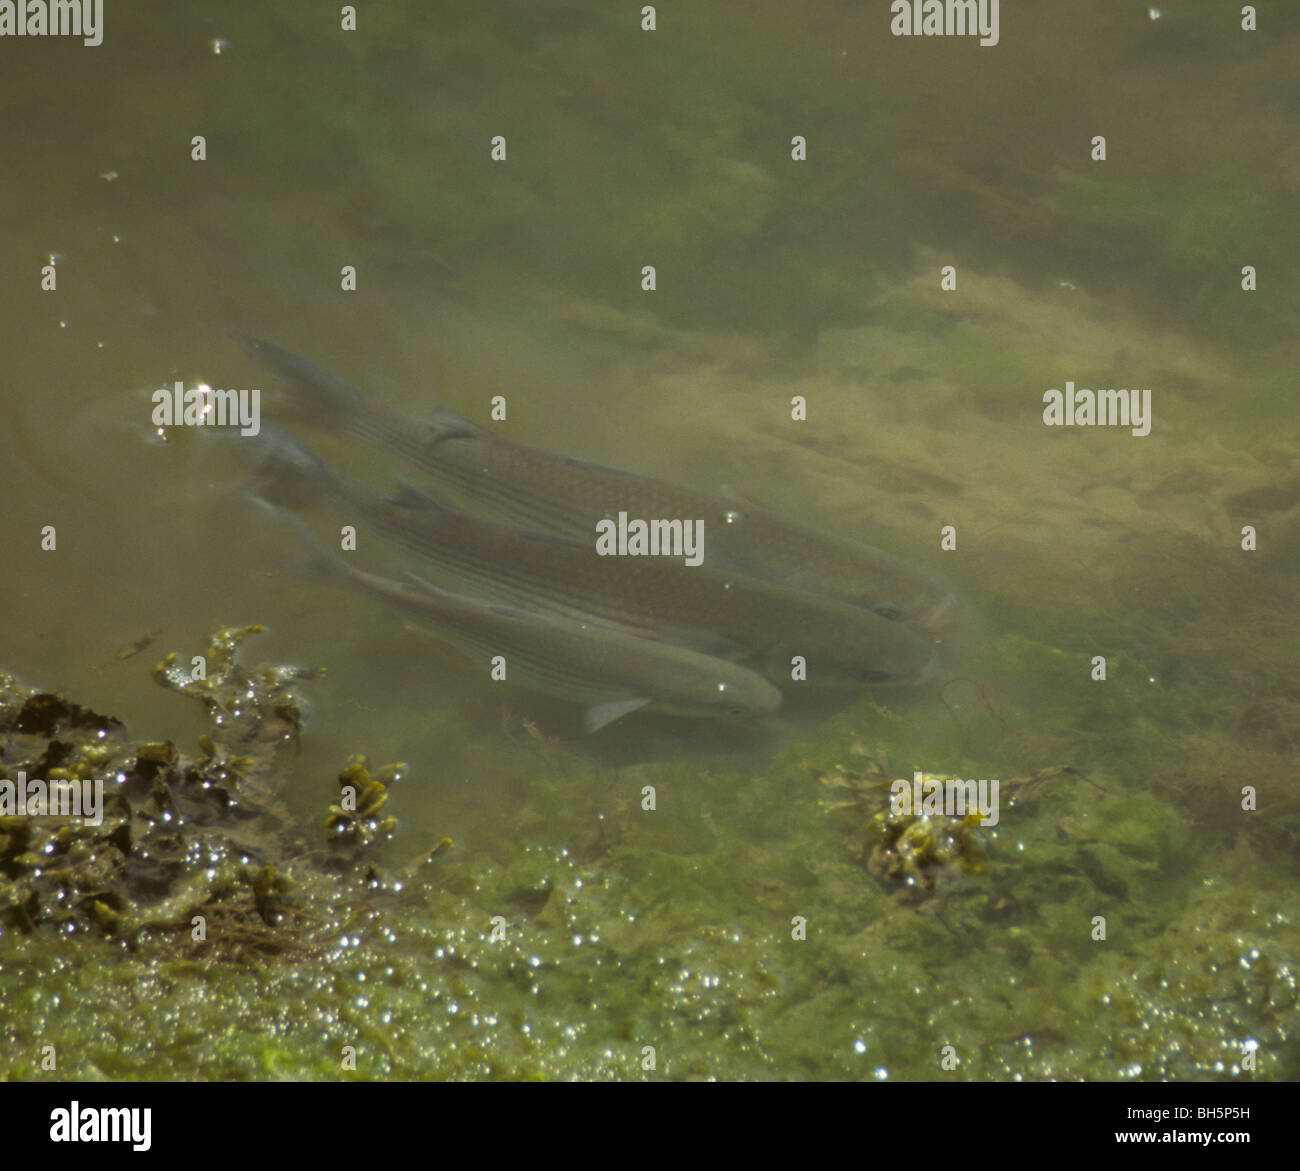 Thick-lipped grey mullet, Chelon labrosus, feeding in shallow brackish waters Stock Photo